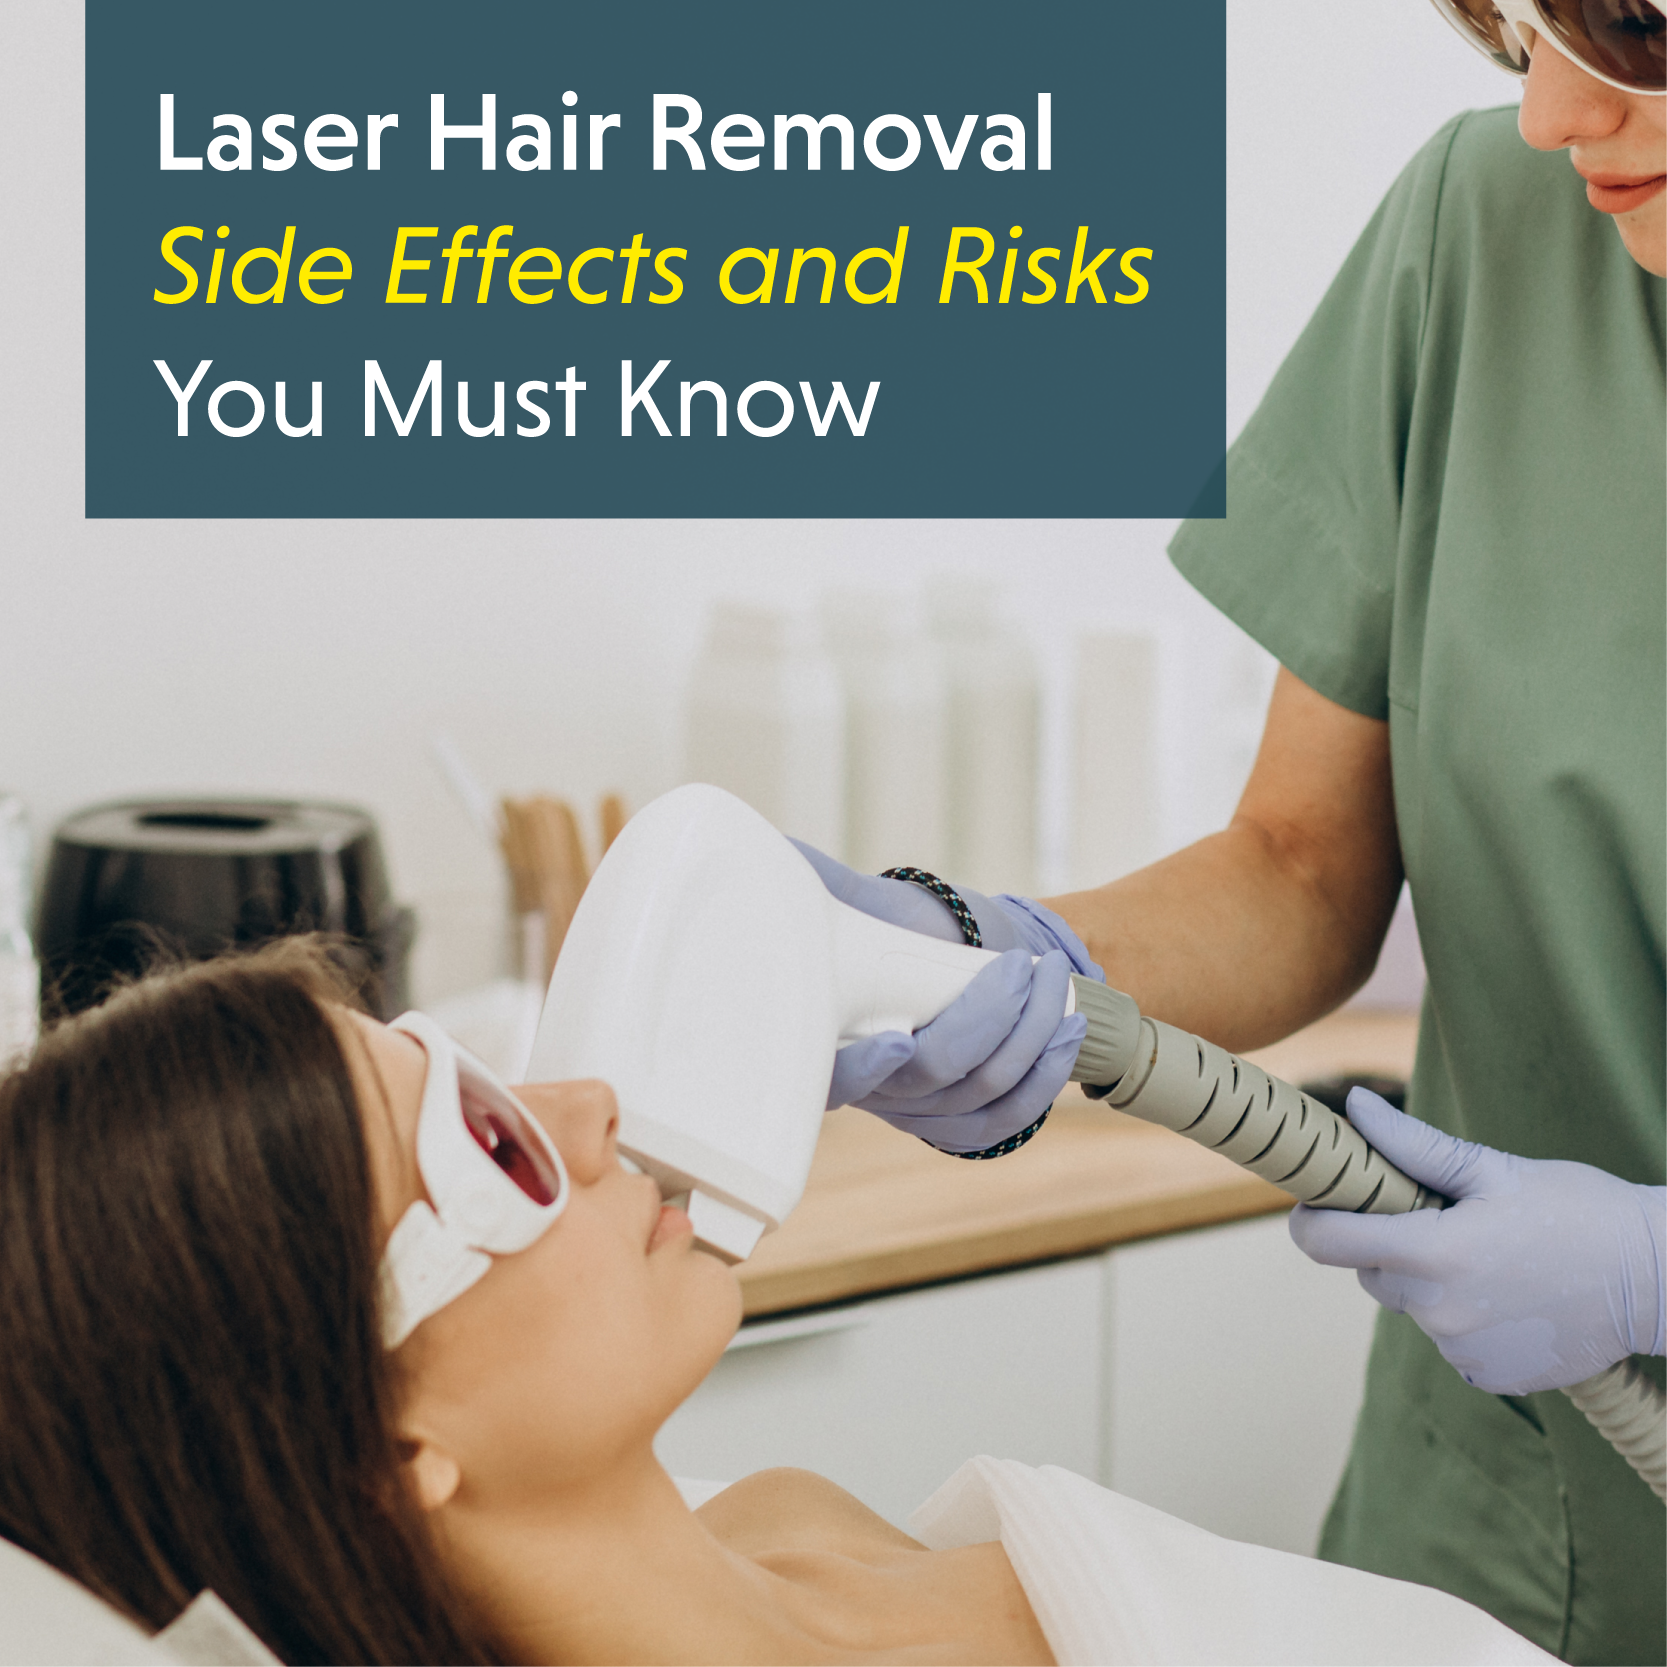 Laser Hair Removal Side Effects